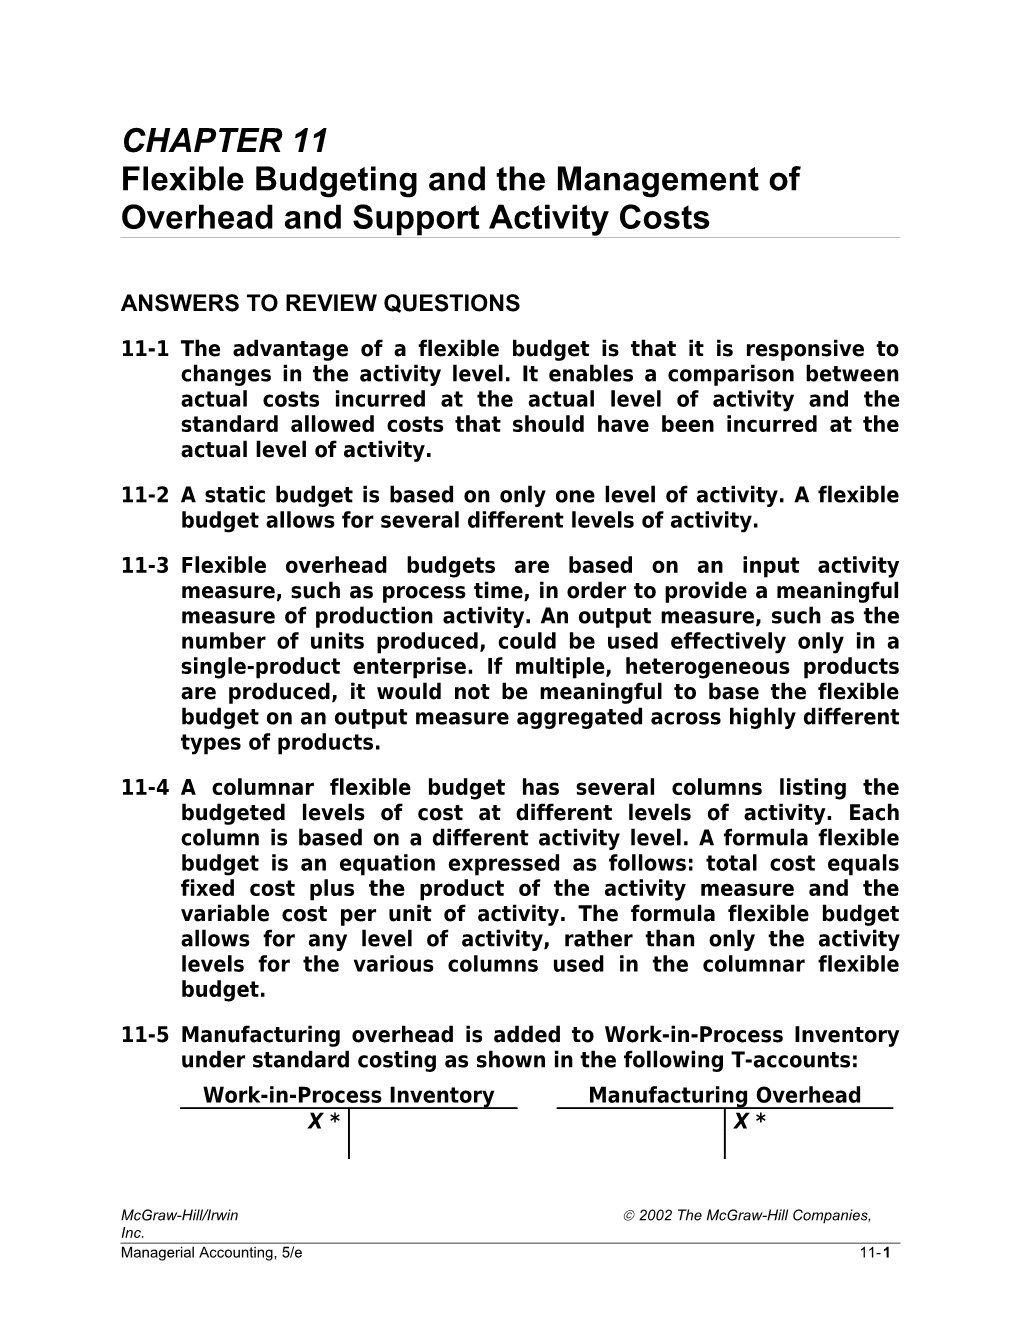 Flexible Budgeting and the Management of Overhead and Support Activity Costs